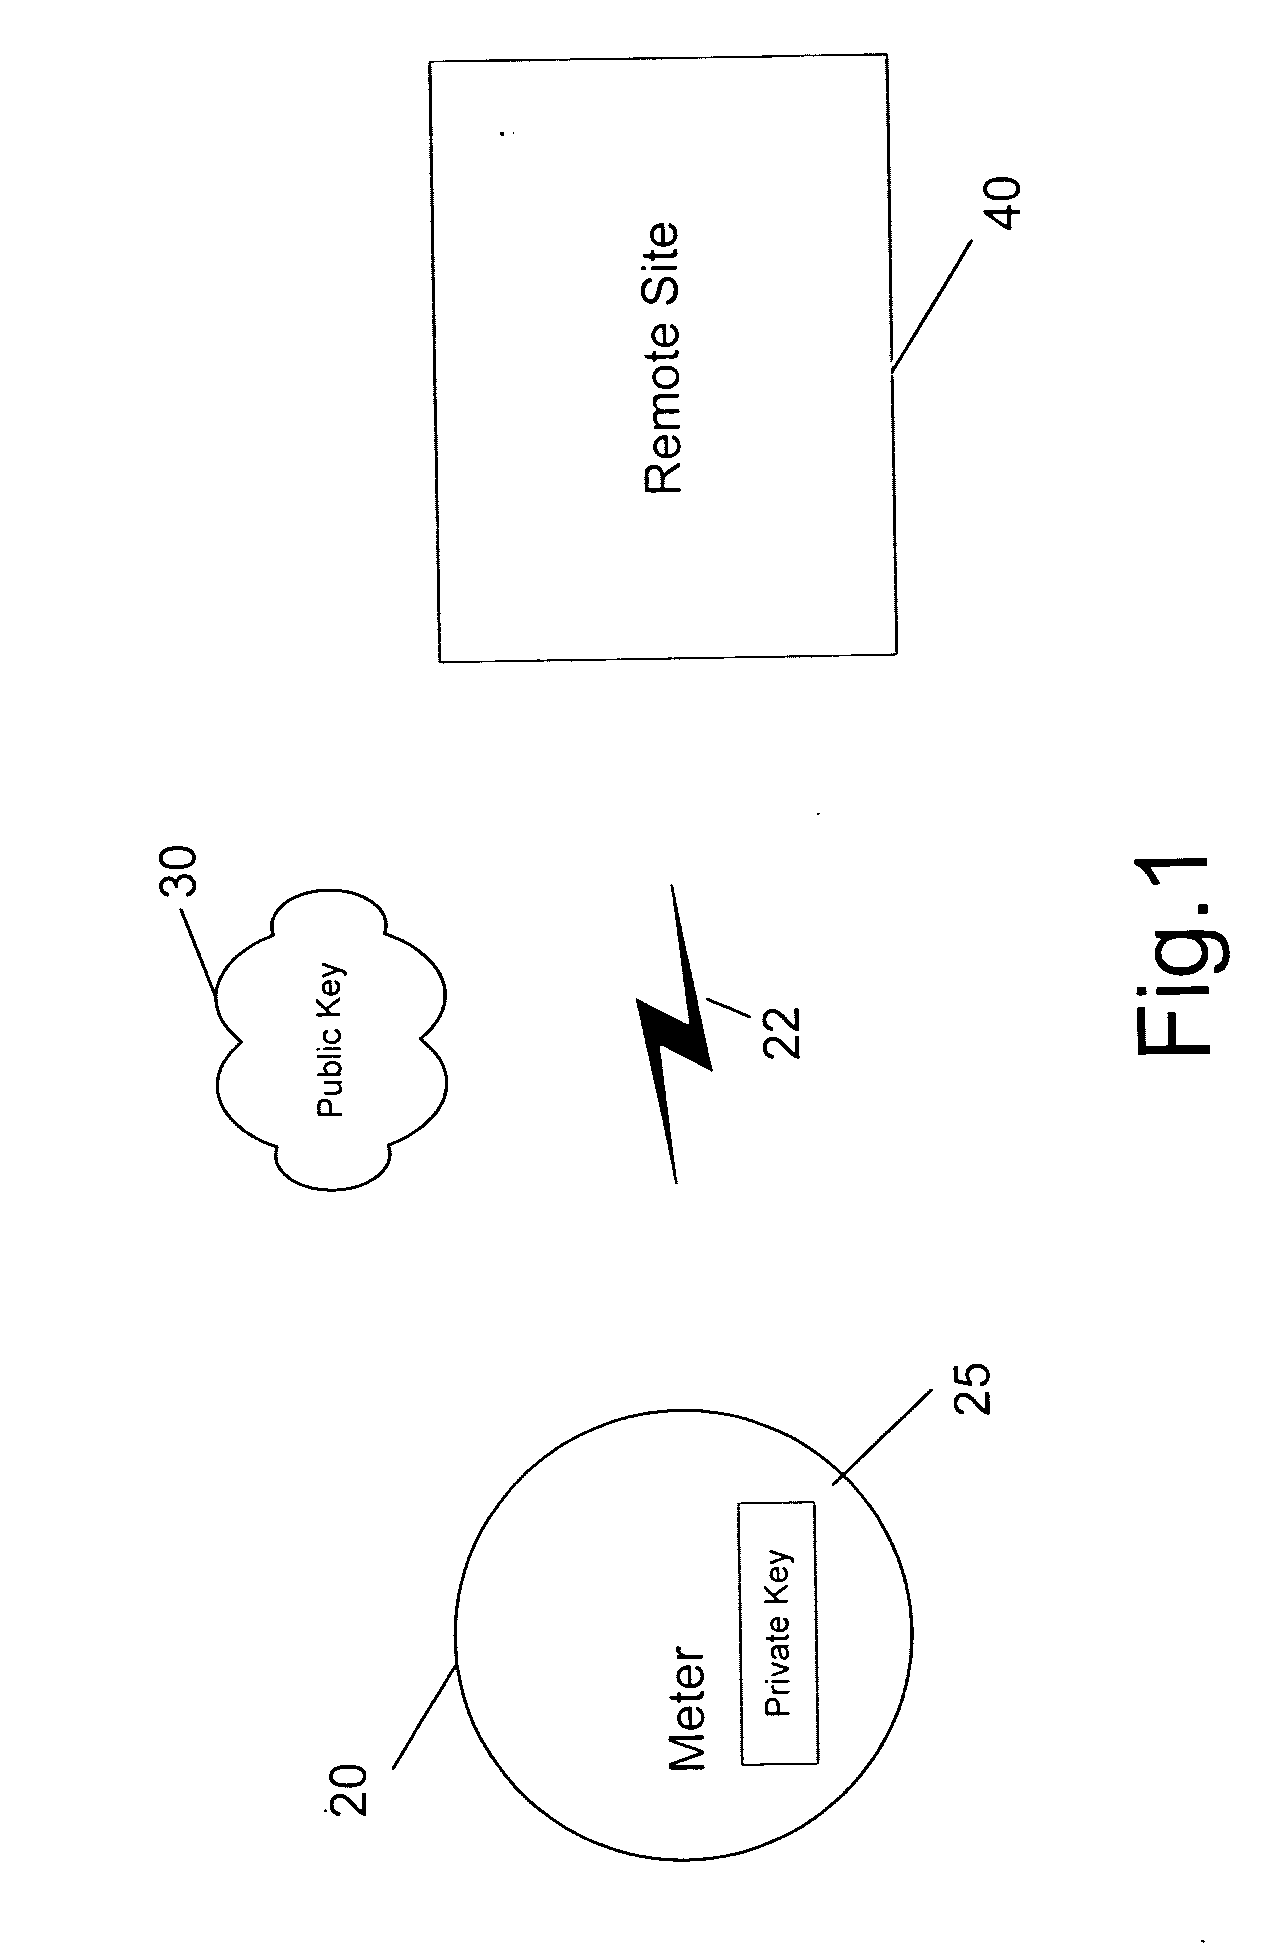 Secure and authenticated delivery of data from an automated meter reading system